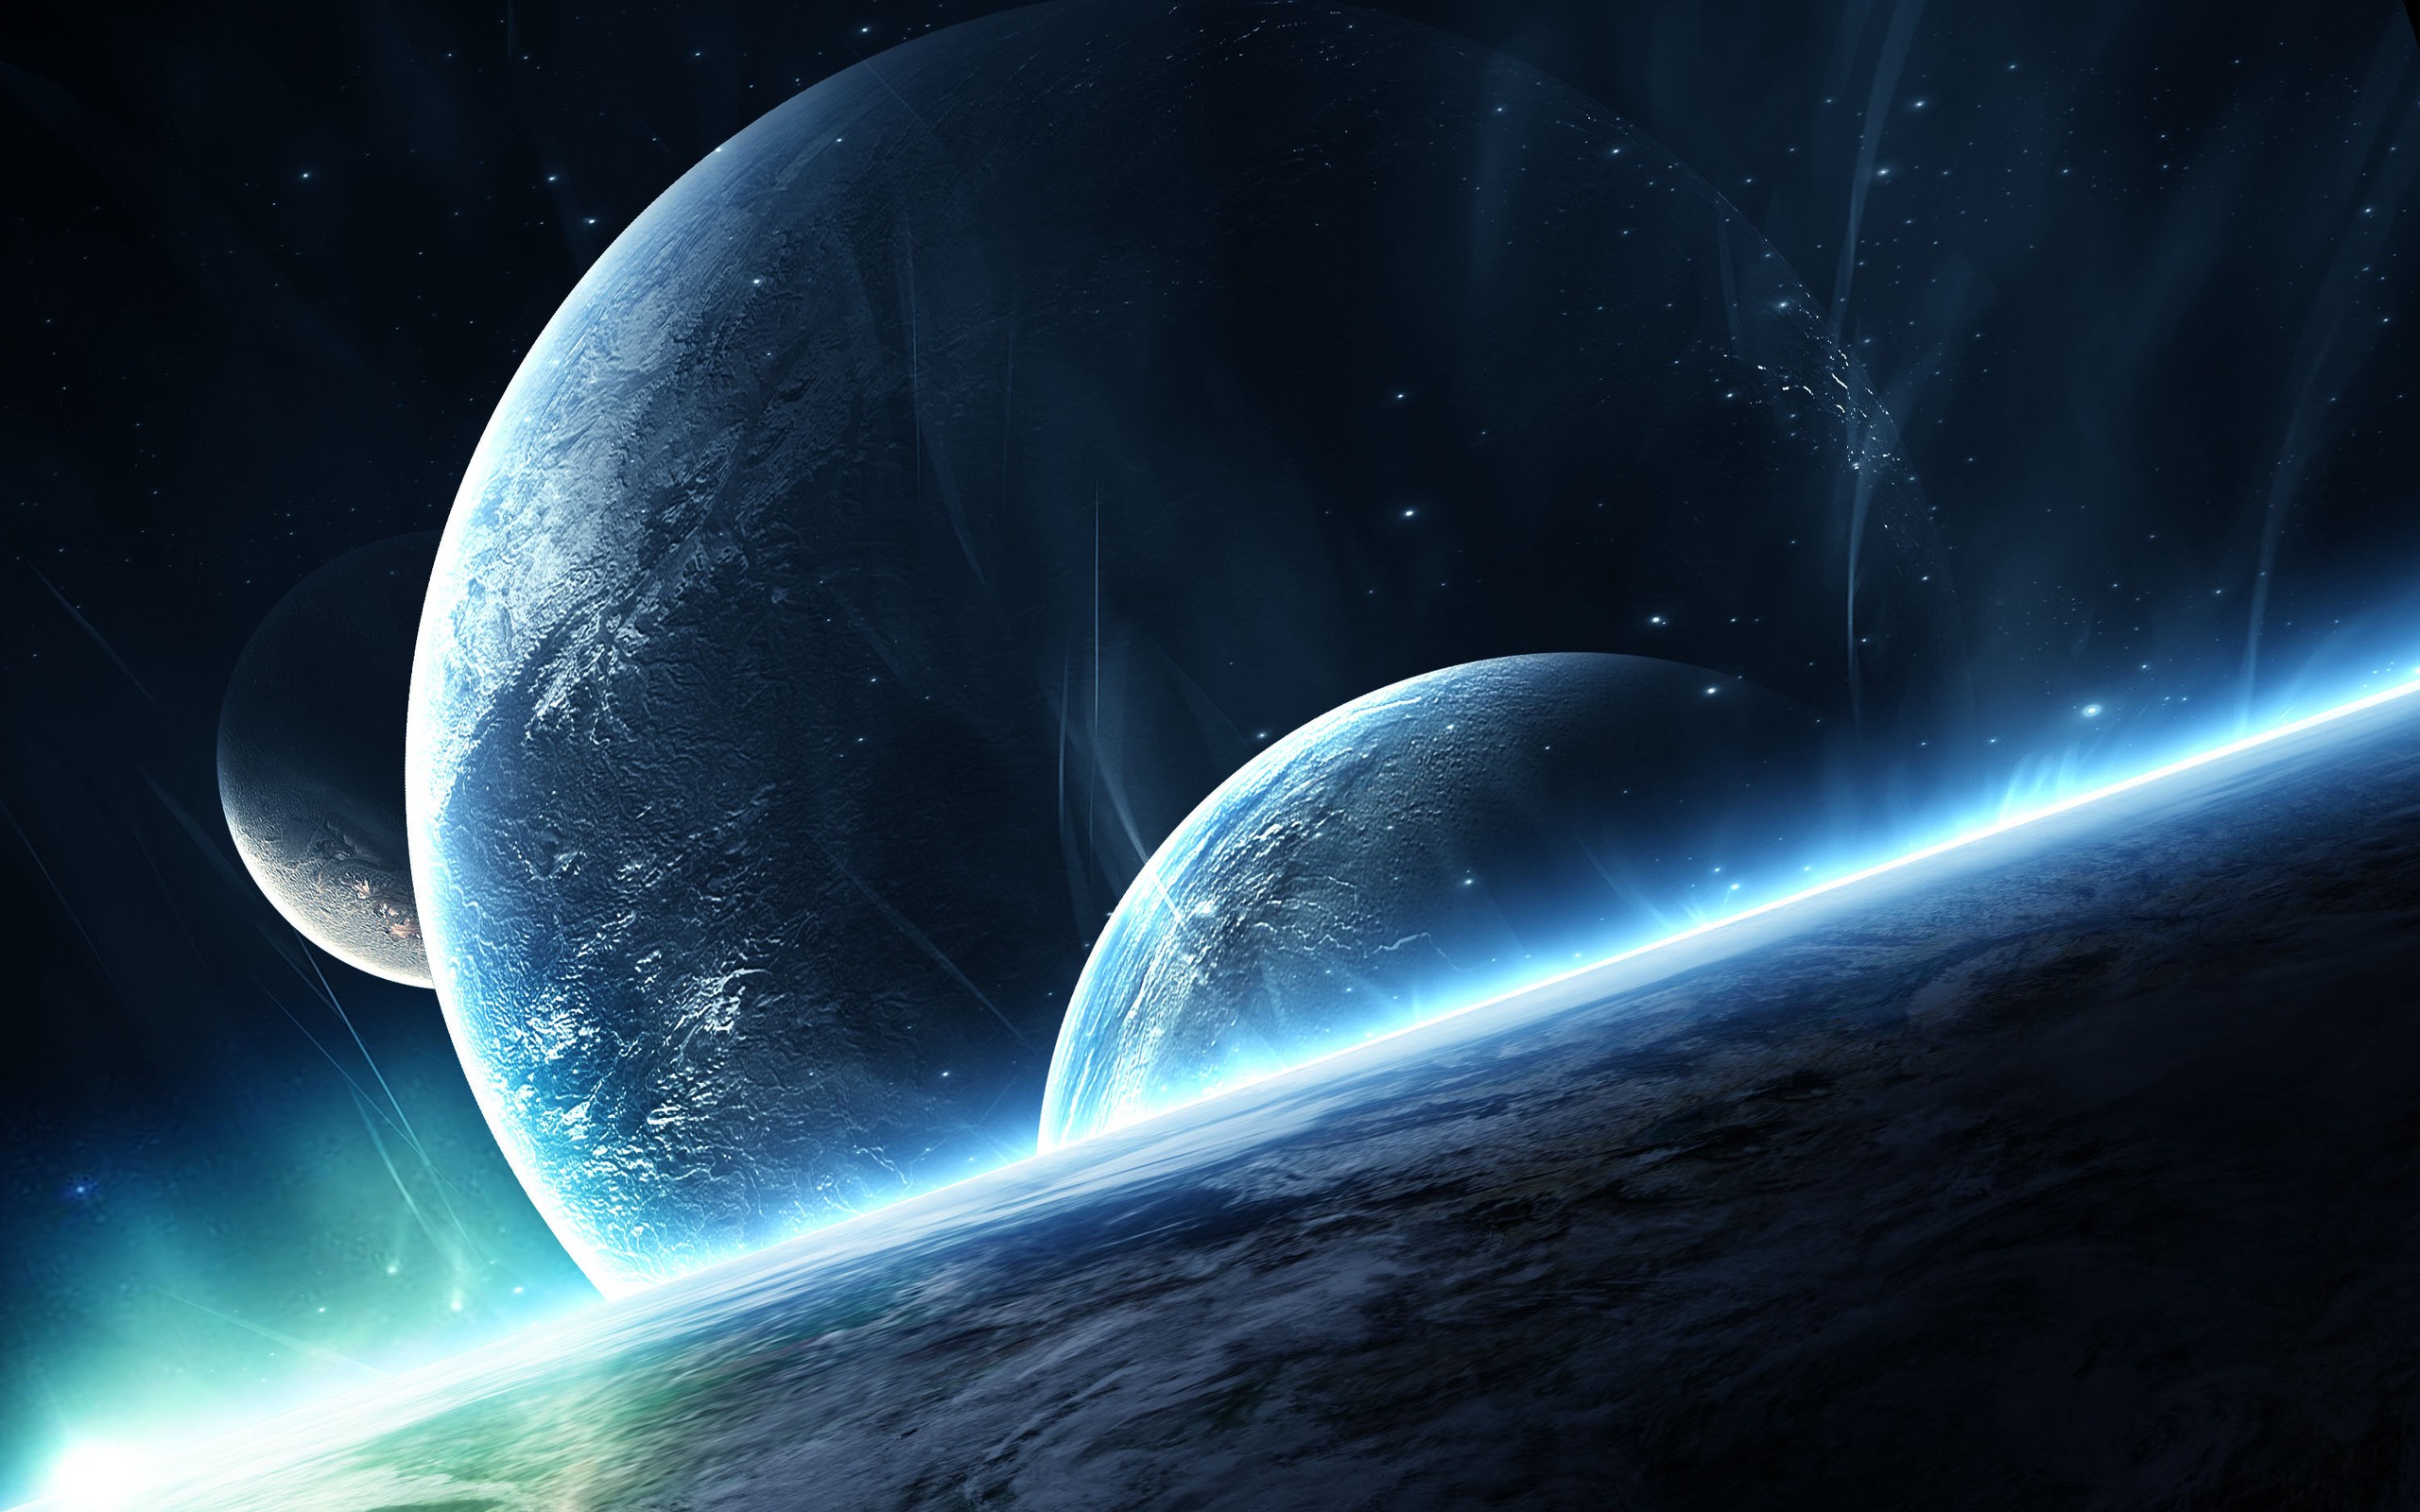 Outer Space Wallpapers Full HD wallpaper is free HD wallpaper